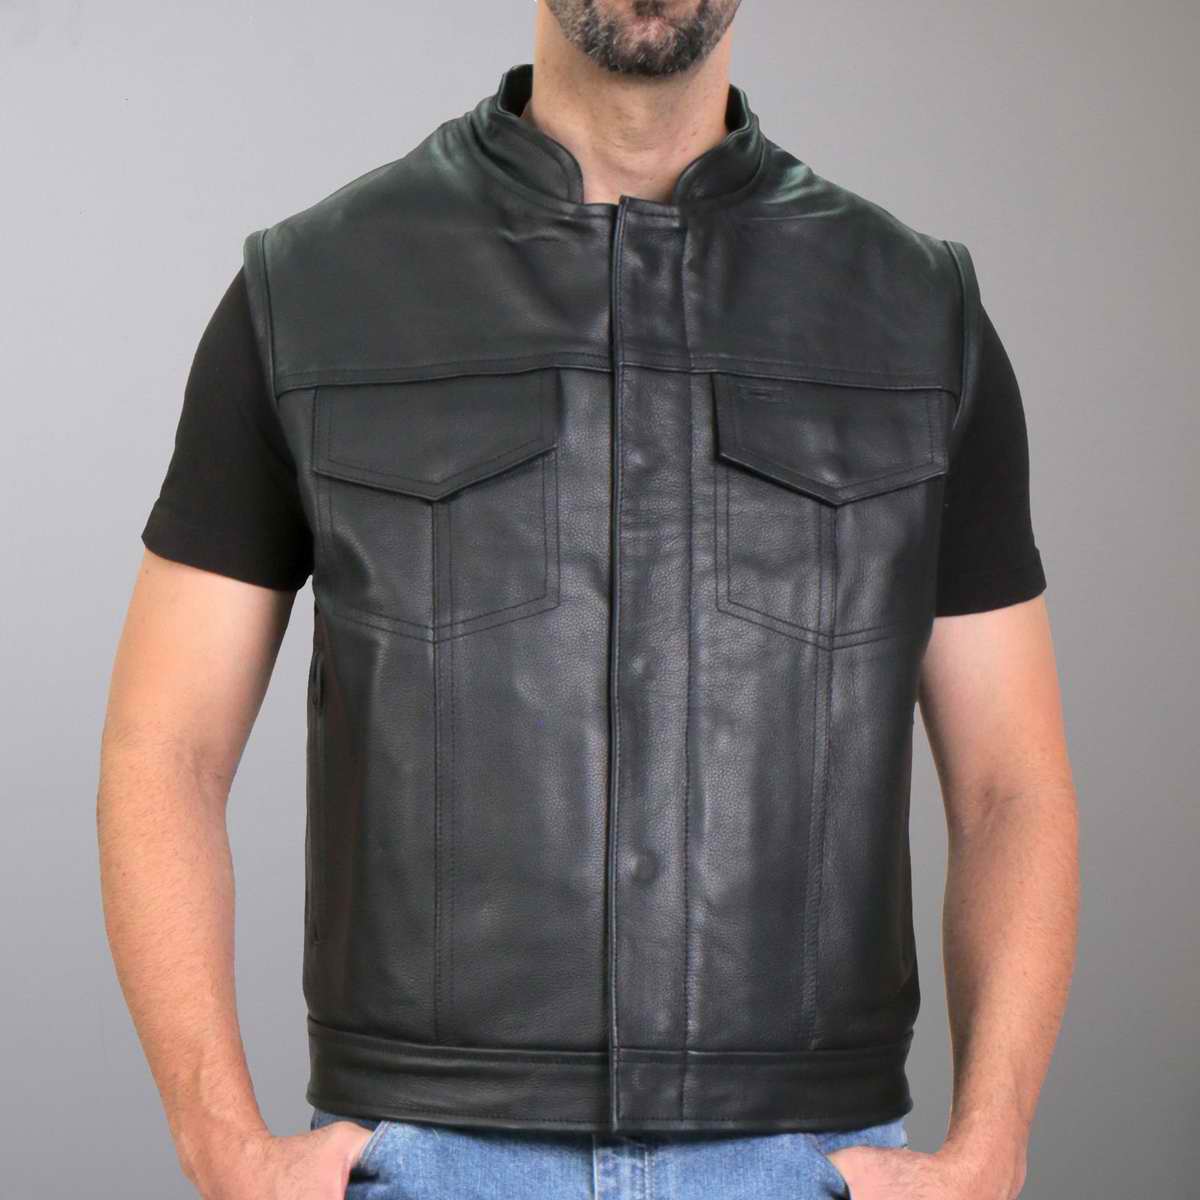 Hot Leathers VSM1058 Men's Black 'Camo Flag' Conceal and Carry Leather Vest